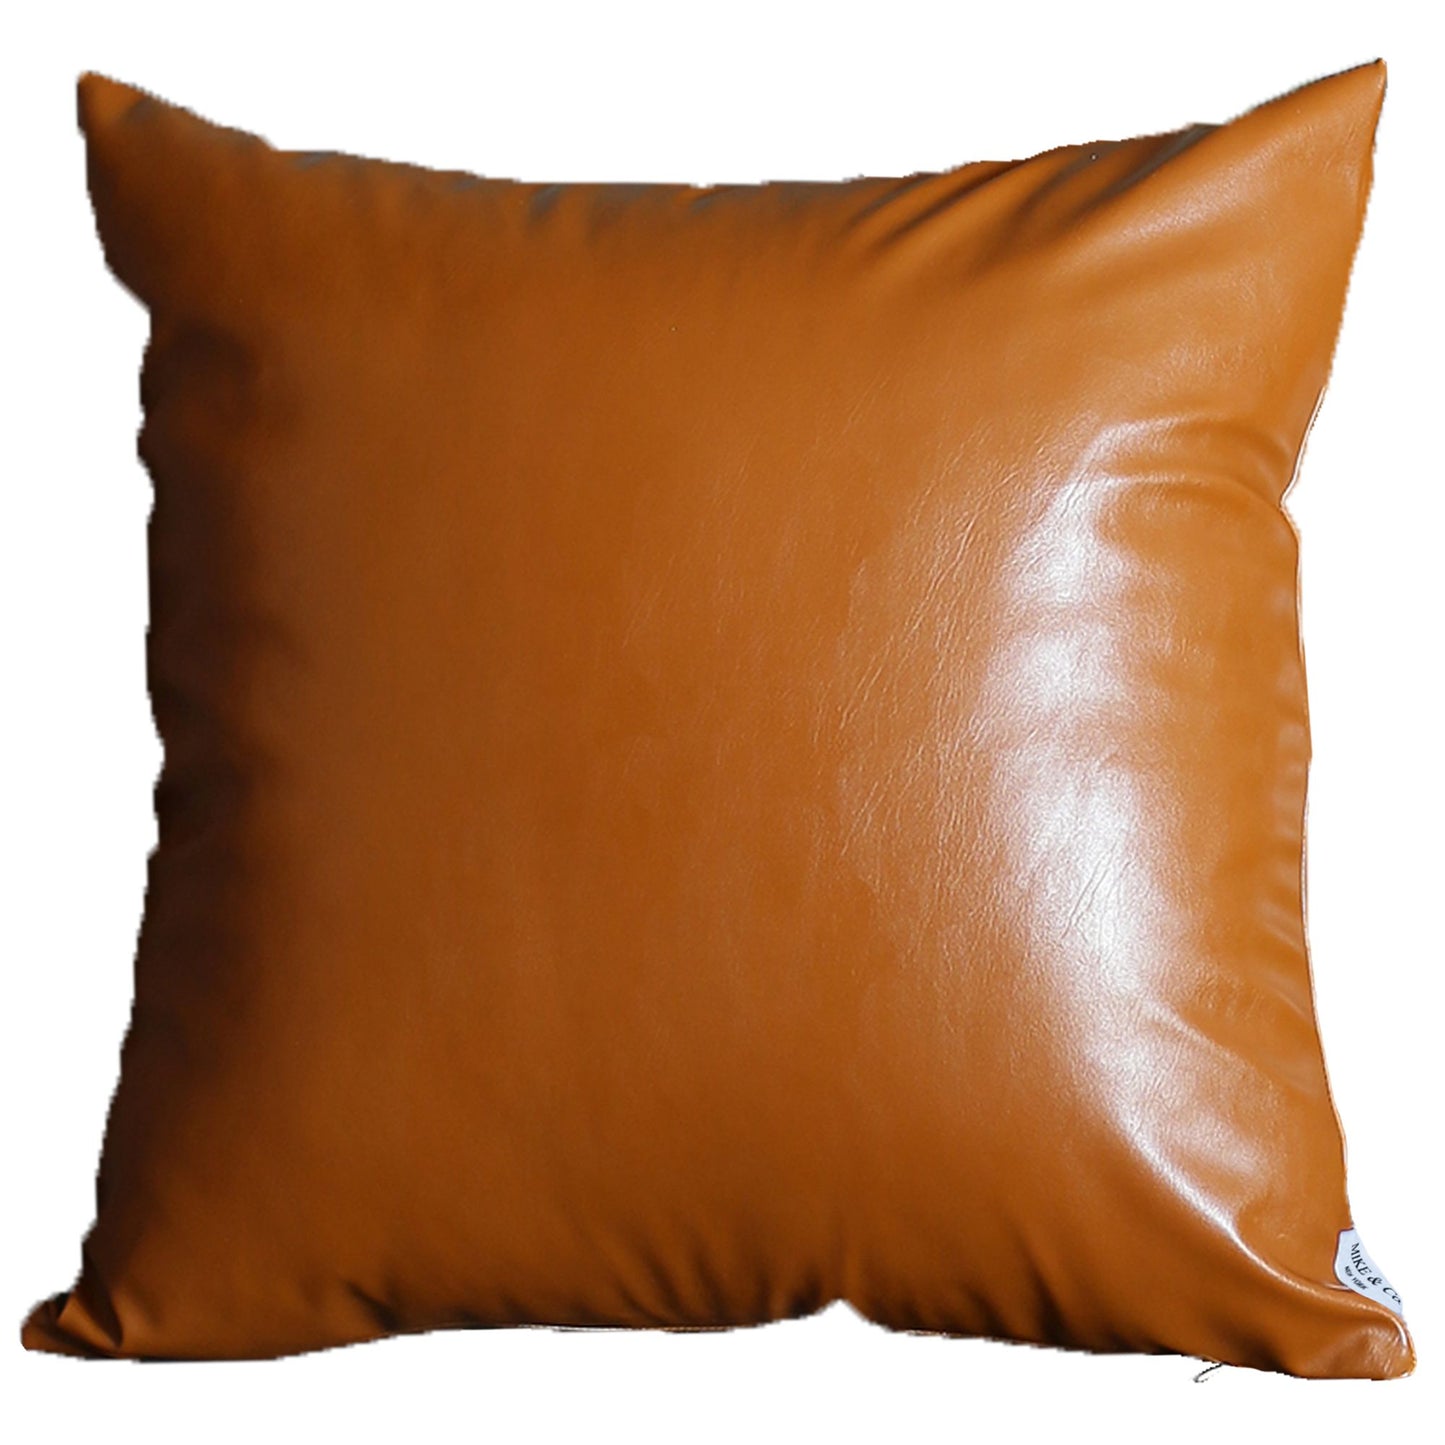 Boho Handcrafted Decorative Single Throw Pillow Cover Vegan Faux Leather Solid for Couch, Bedding